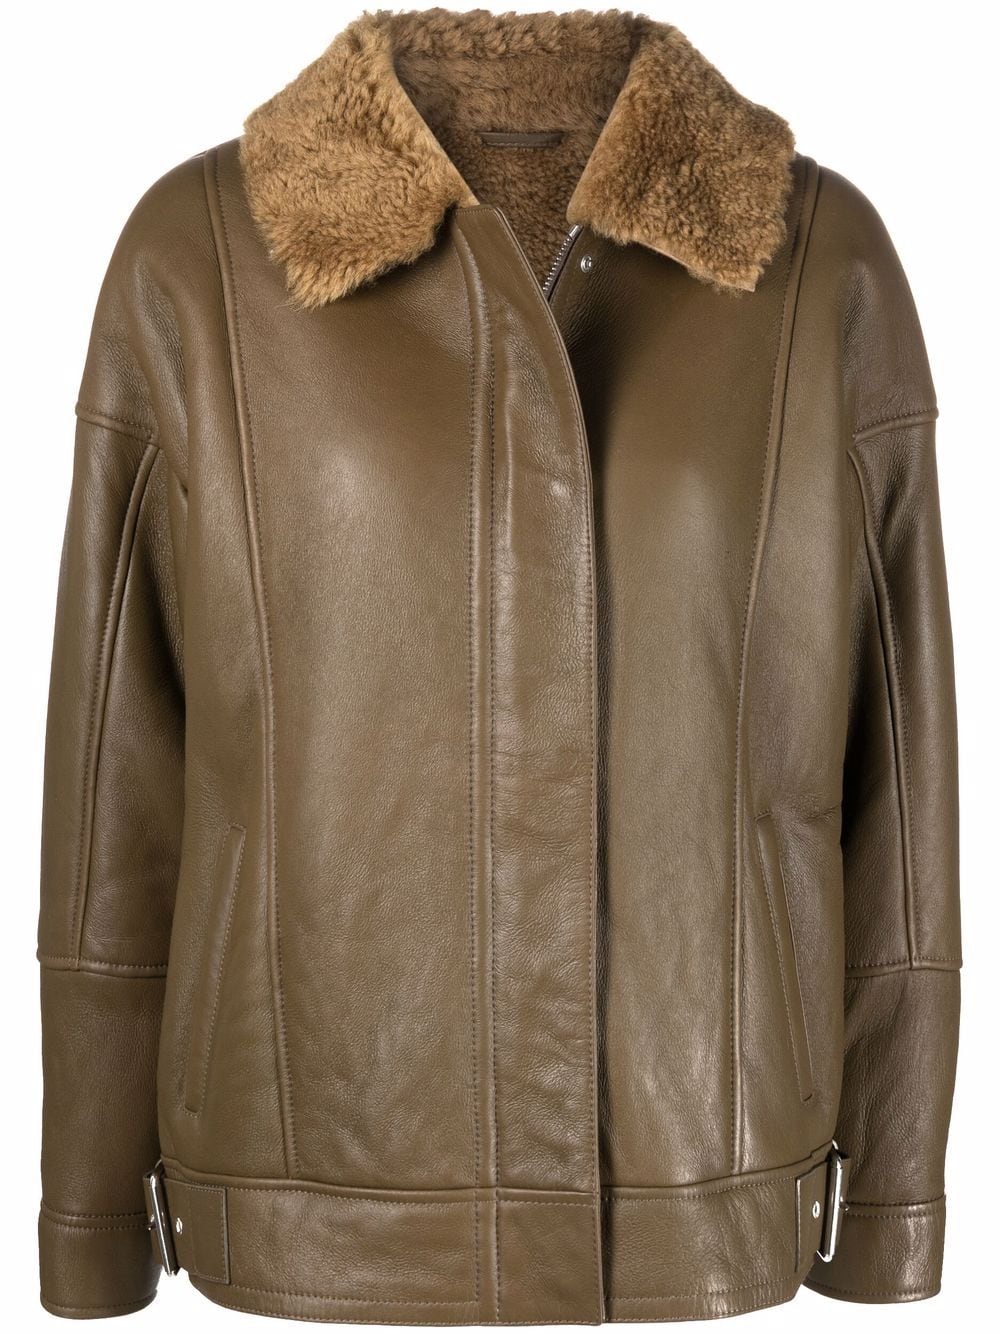 COMMON LEISURE SHEARLING-TRIM LEATHER JACKET